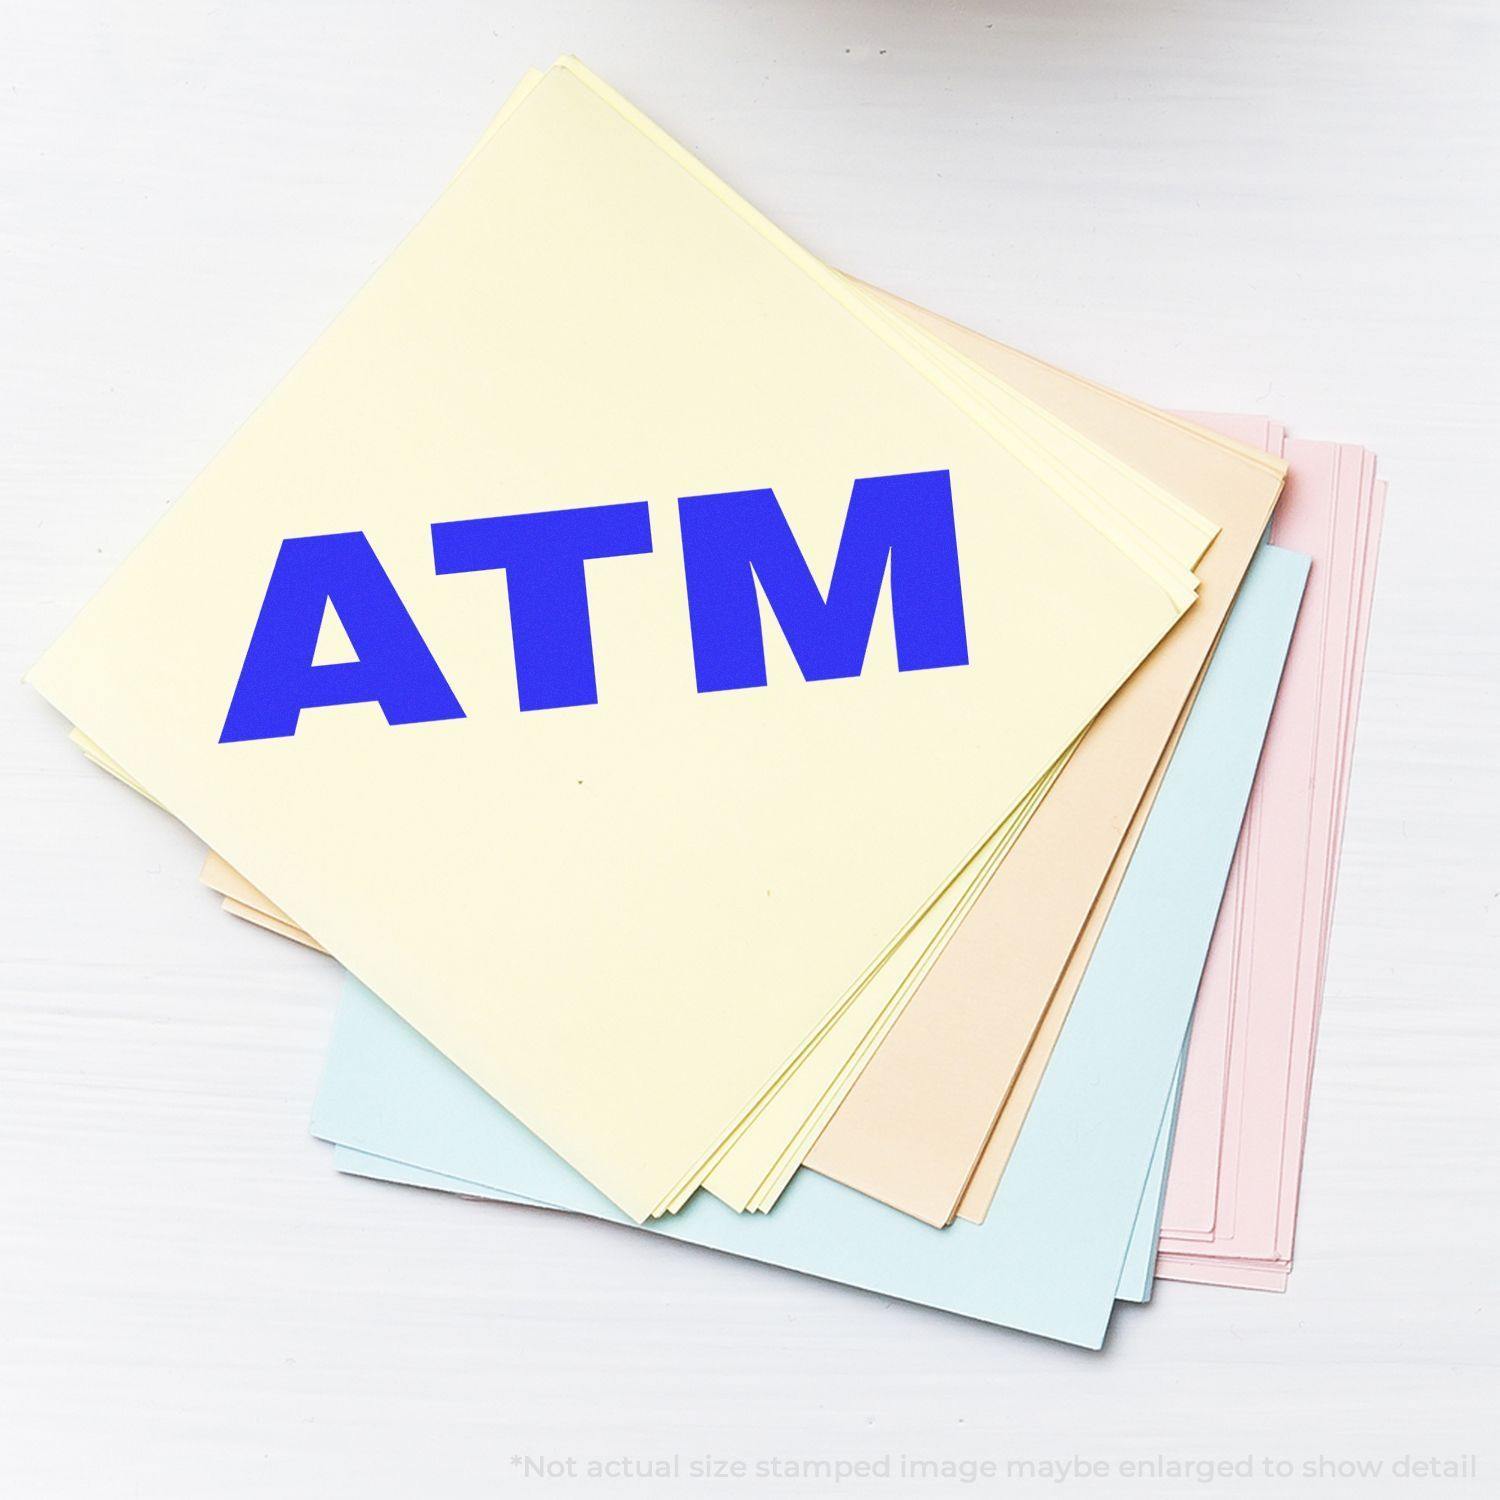 A self-inking stamp with a stamped image showing how the text "ATM" in a large bold font is displayed by it.